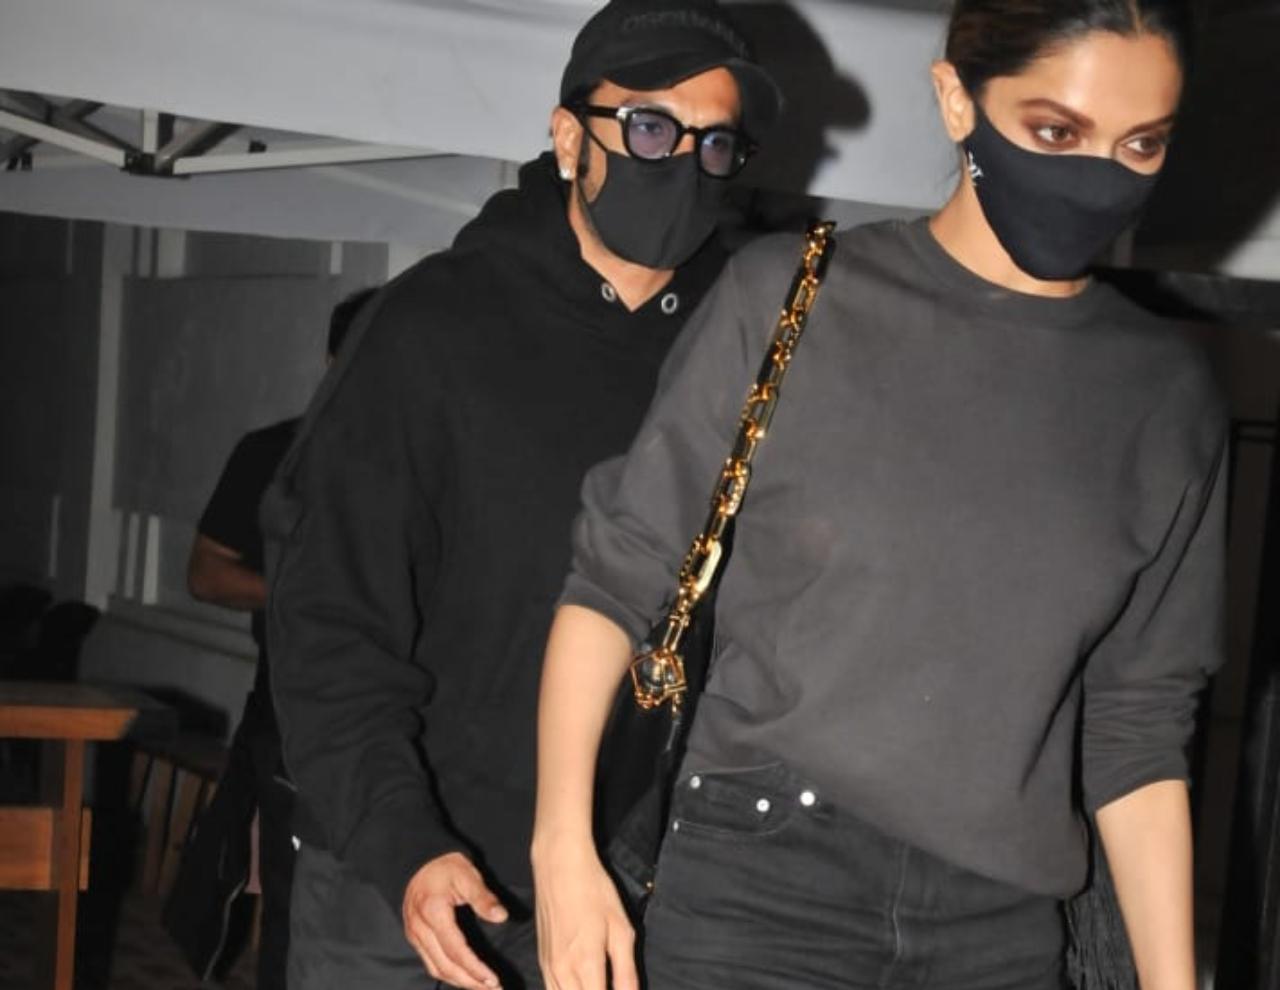 Deepika Padukone was snapped with her husband Ranveer Singh. On the work front, the couple will be seen together in Kabir Khan's '83, based on Indian cricket team's 1983 World Cup victory.